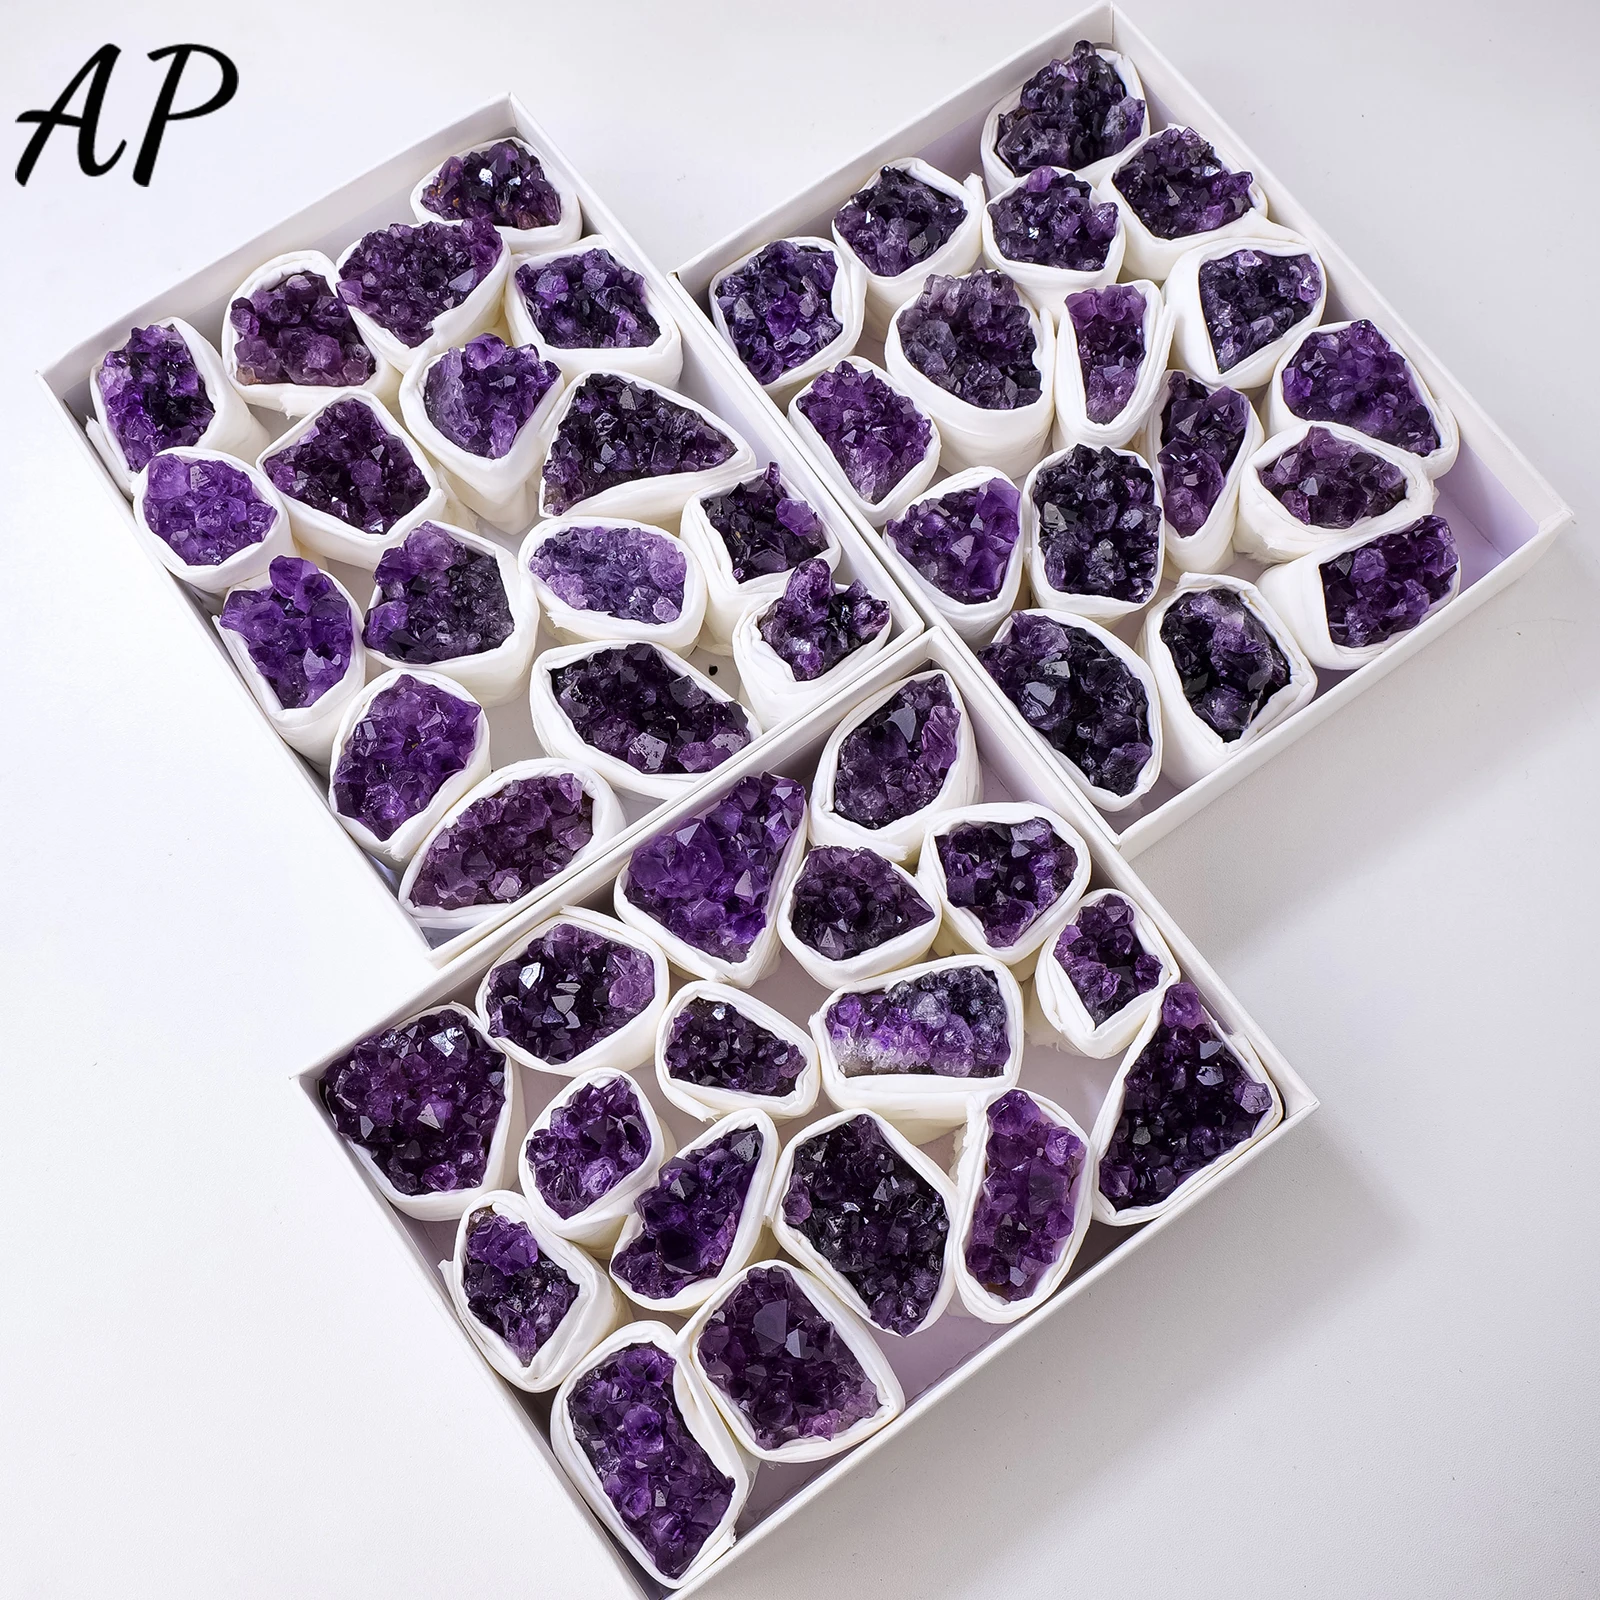 

1pc Natural Amethyst Cluster Block Raw Stone Set Ornament Make a Wish Crystal Cluster Home Decoration